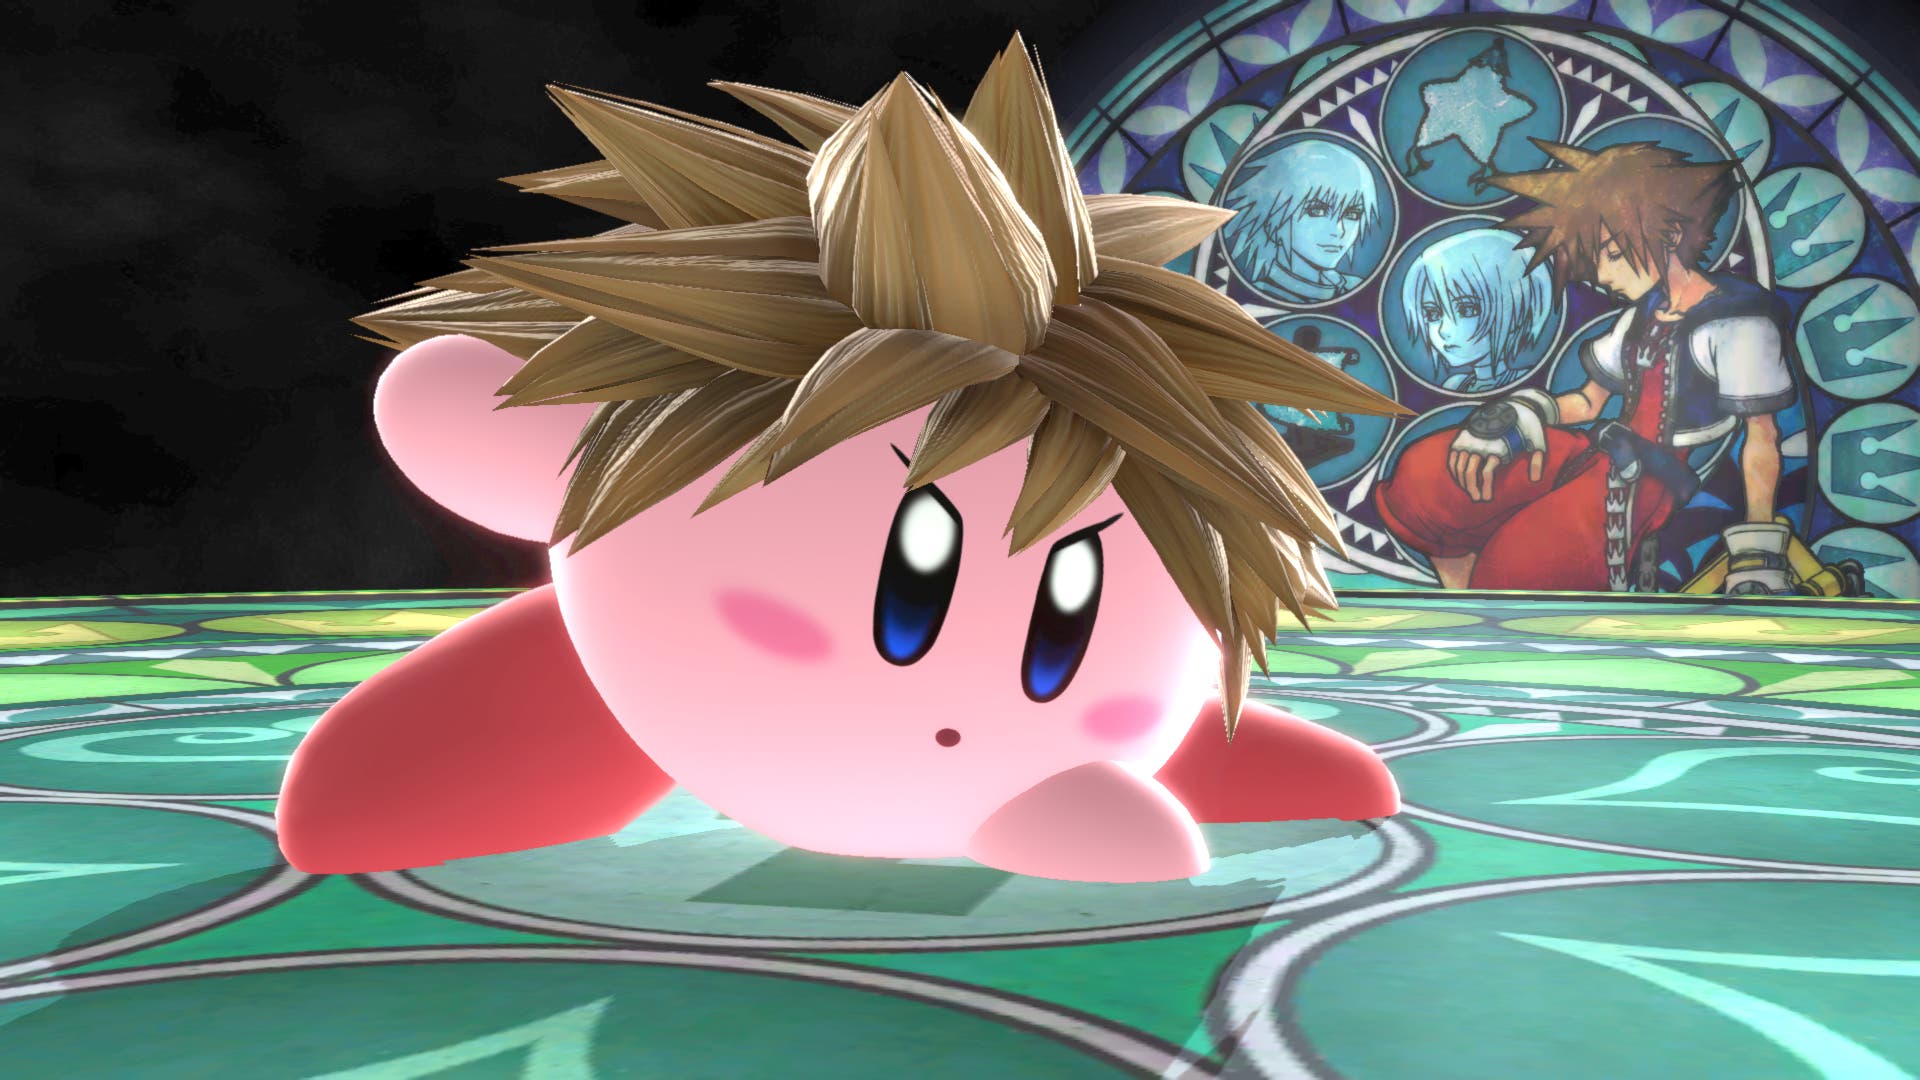 This is what Kirby looks like after swallowing Sora in Super Smash Bros. Ultimate thumbnail